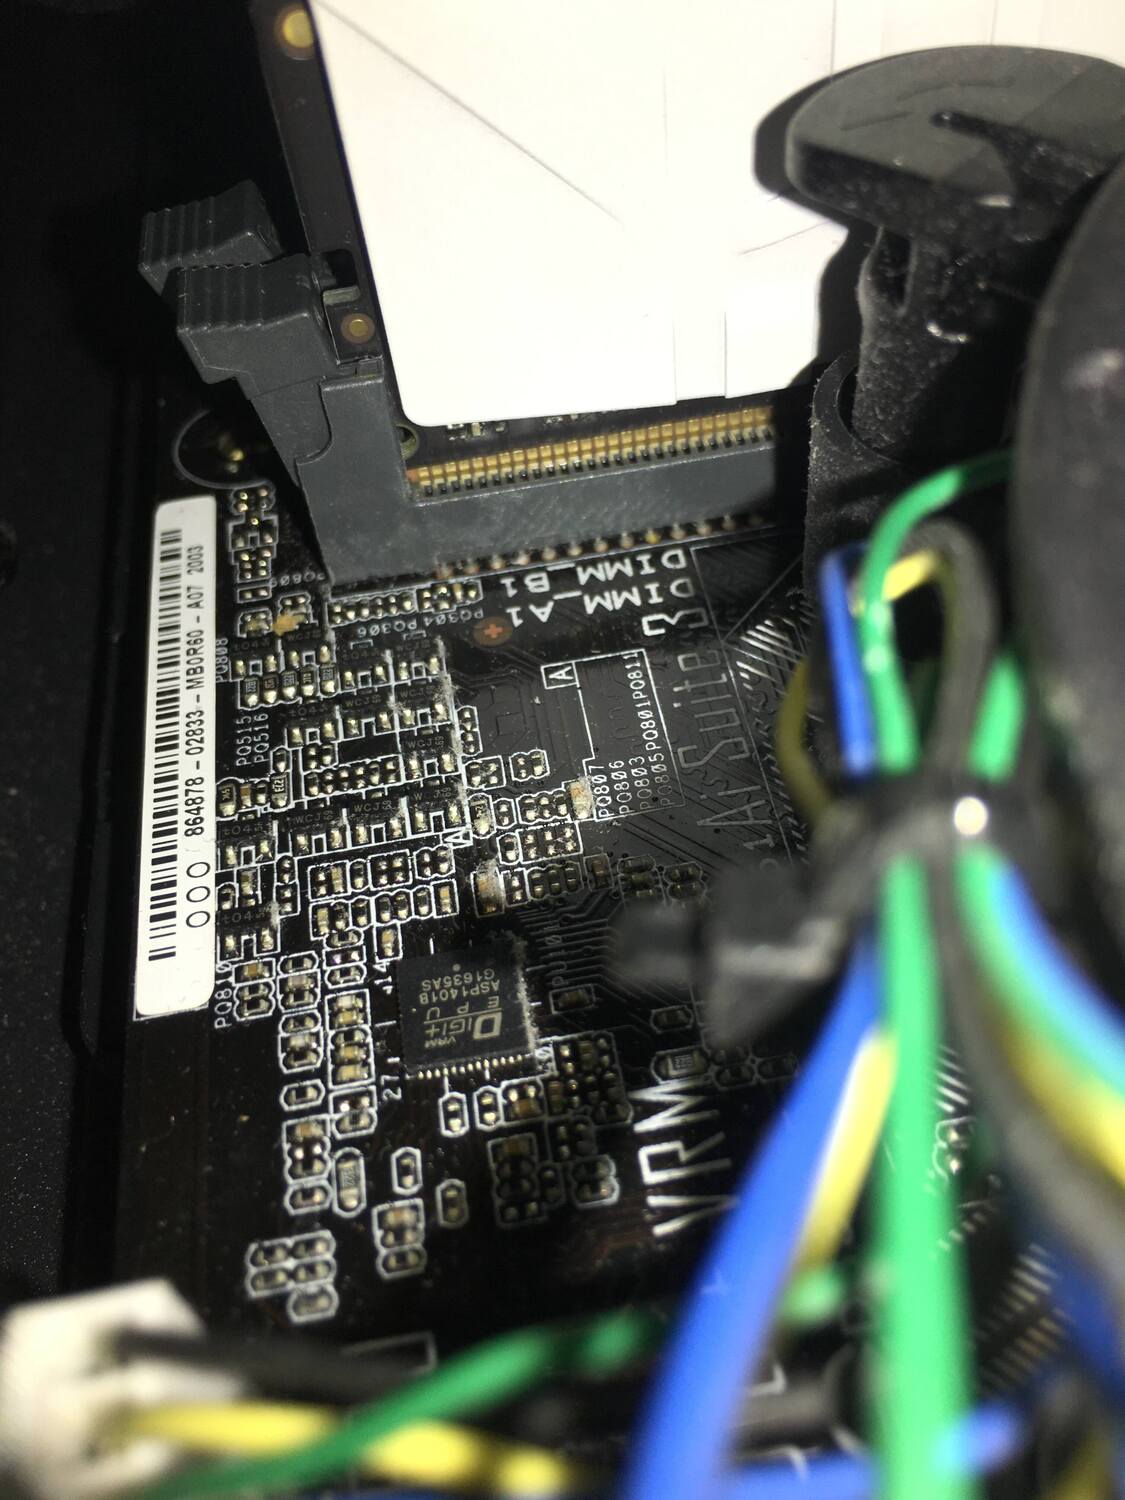 My DDR4 ram isn’t clicking into my motherboard - CPUs, Motherboards